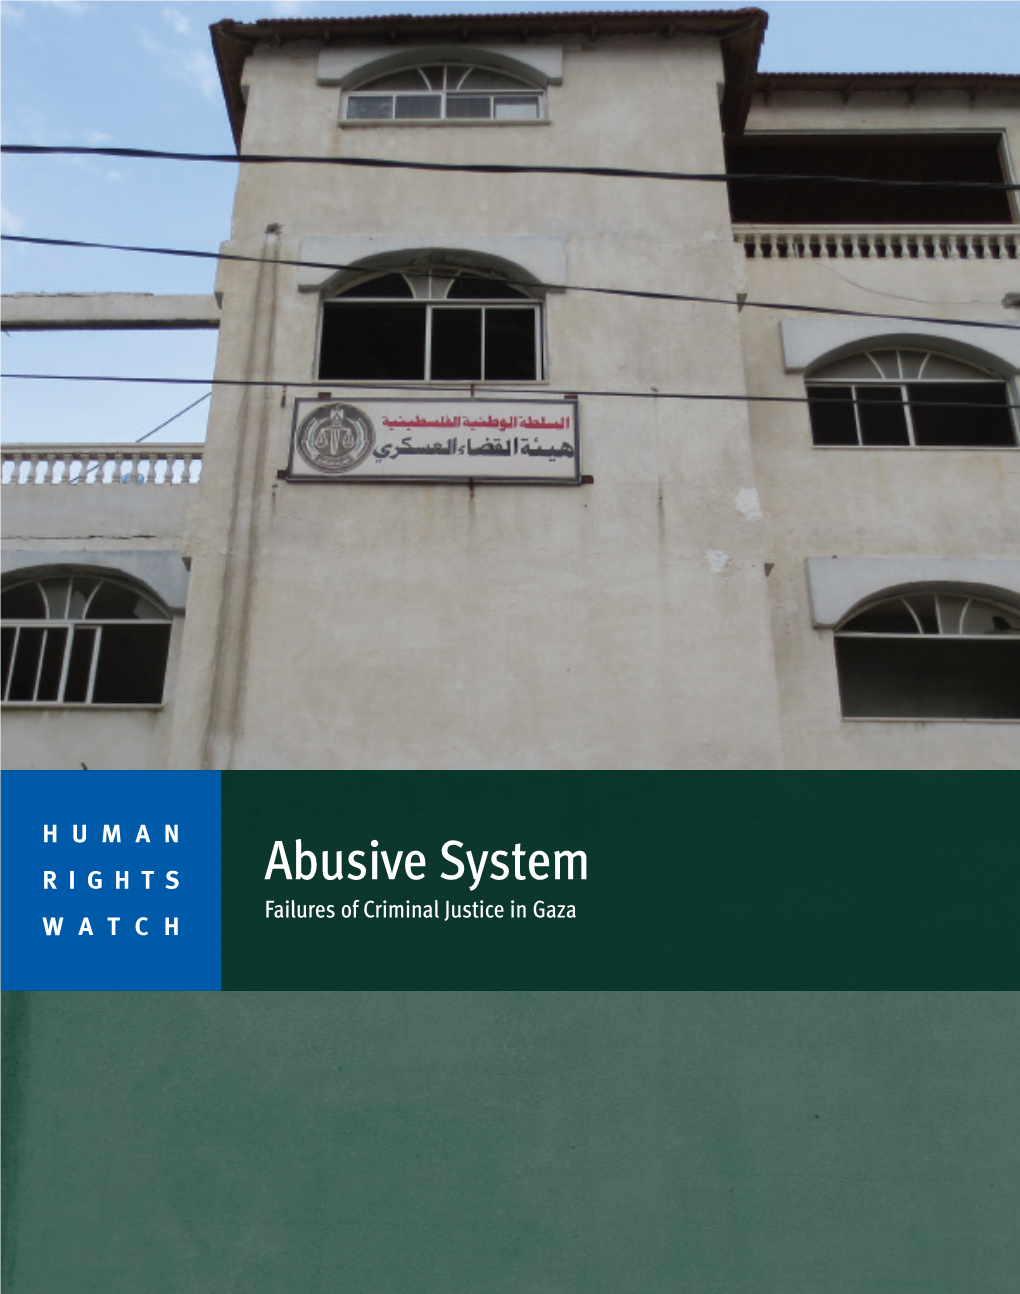 Abusive System: Failures of Criminal Justice in Gaza